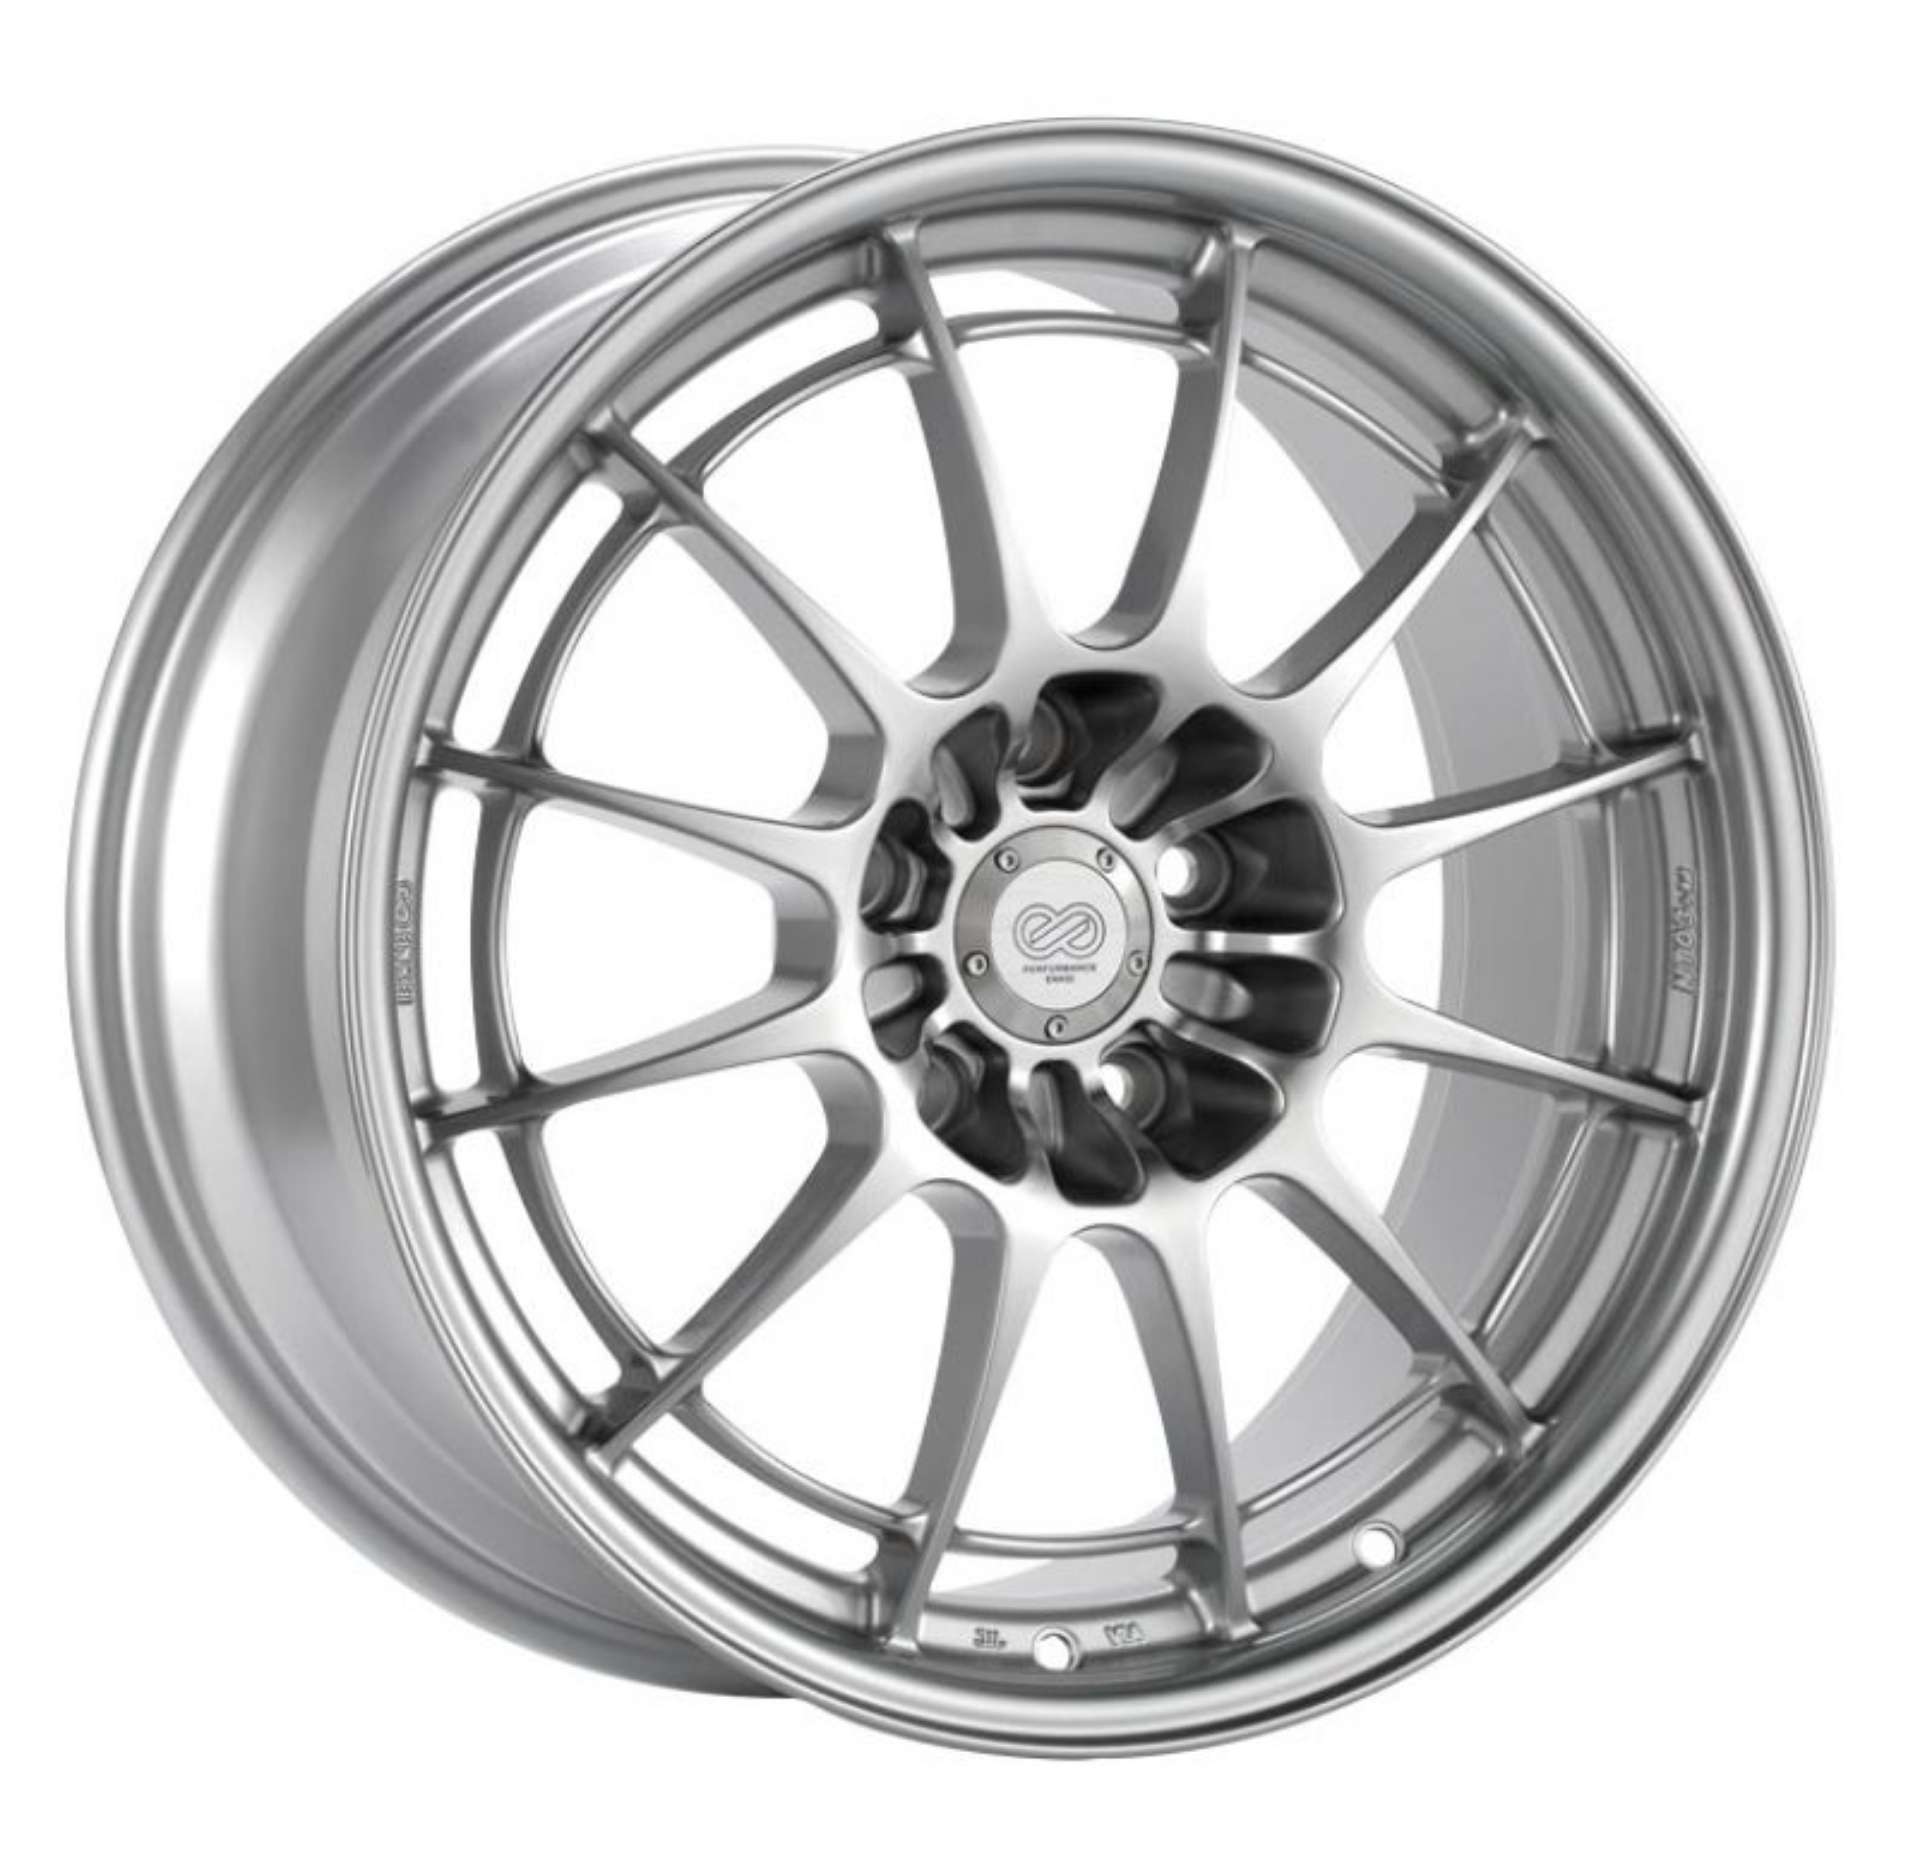 Picture of Enkei NT03+M 18x9-5 5x100 40mm Offset Silver Wheel *MOQ of 40*